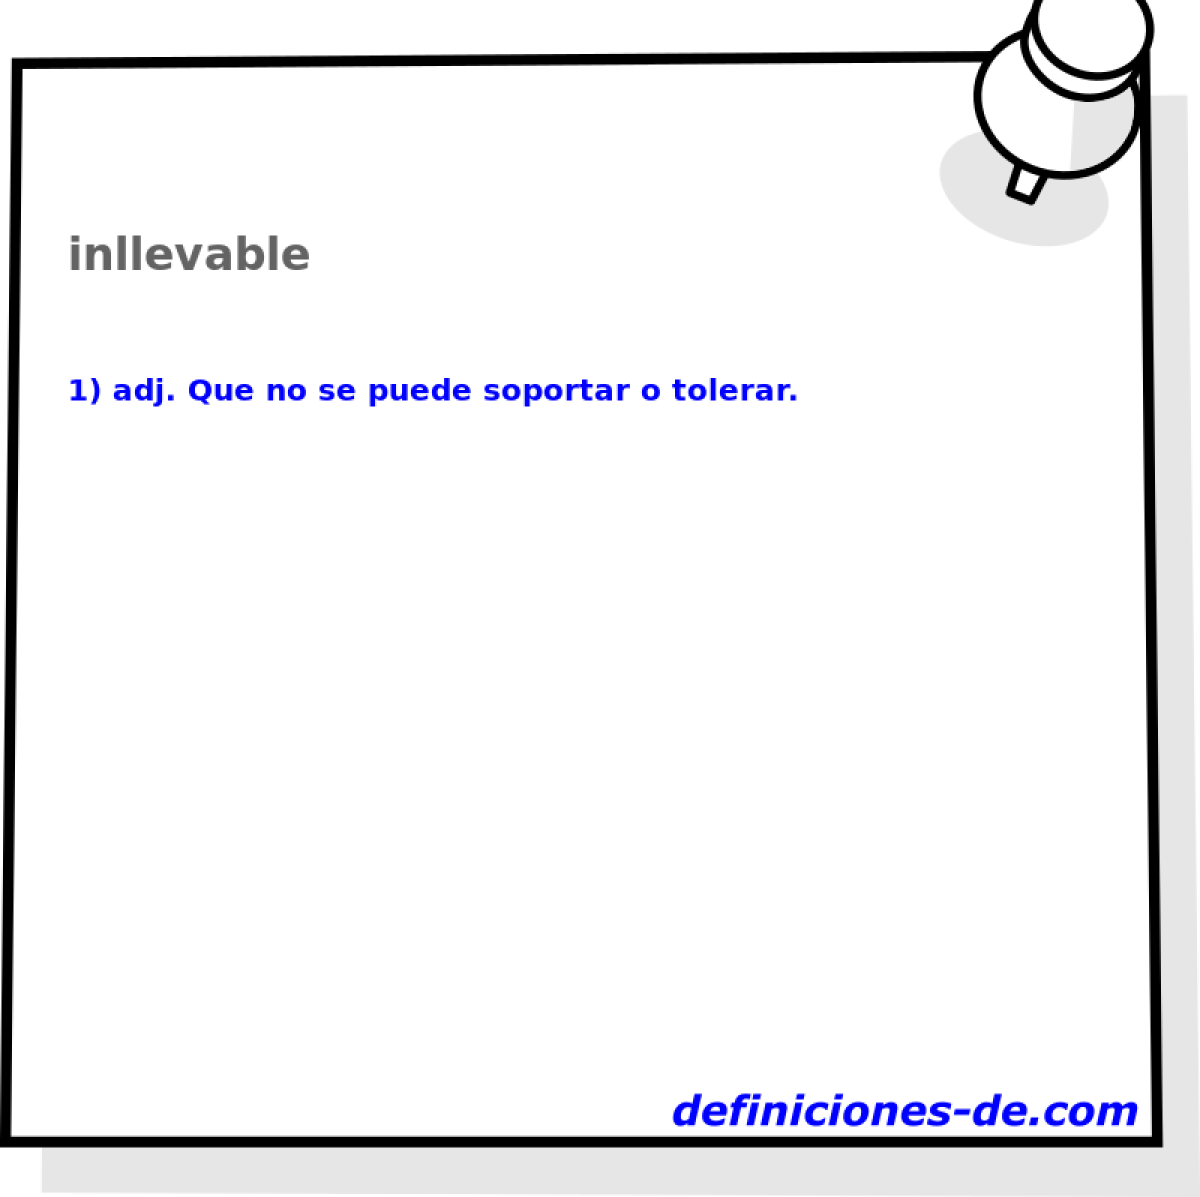 inllevable 